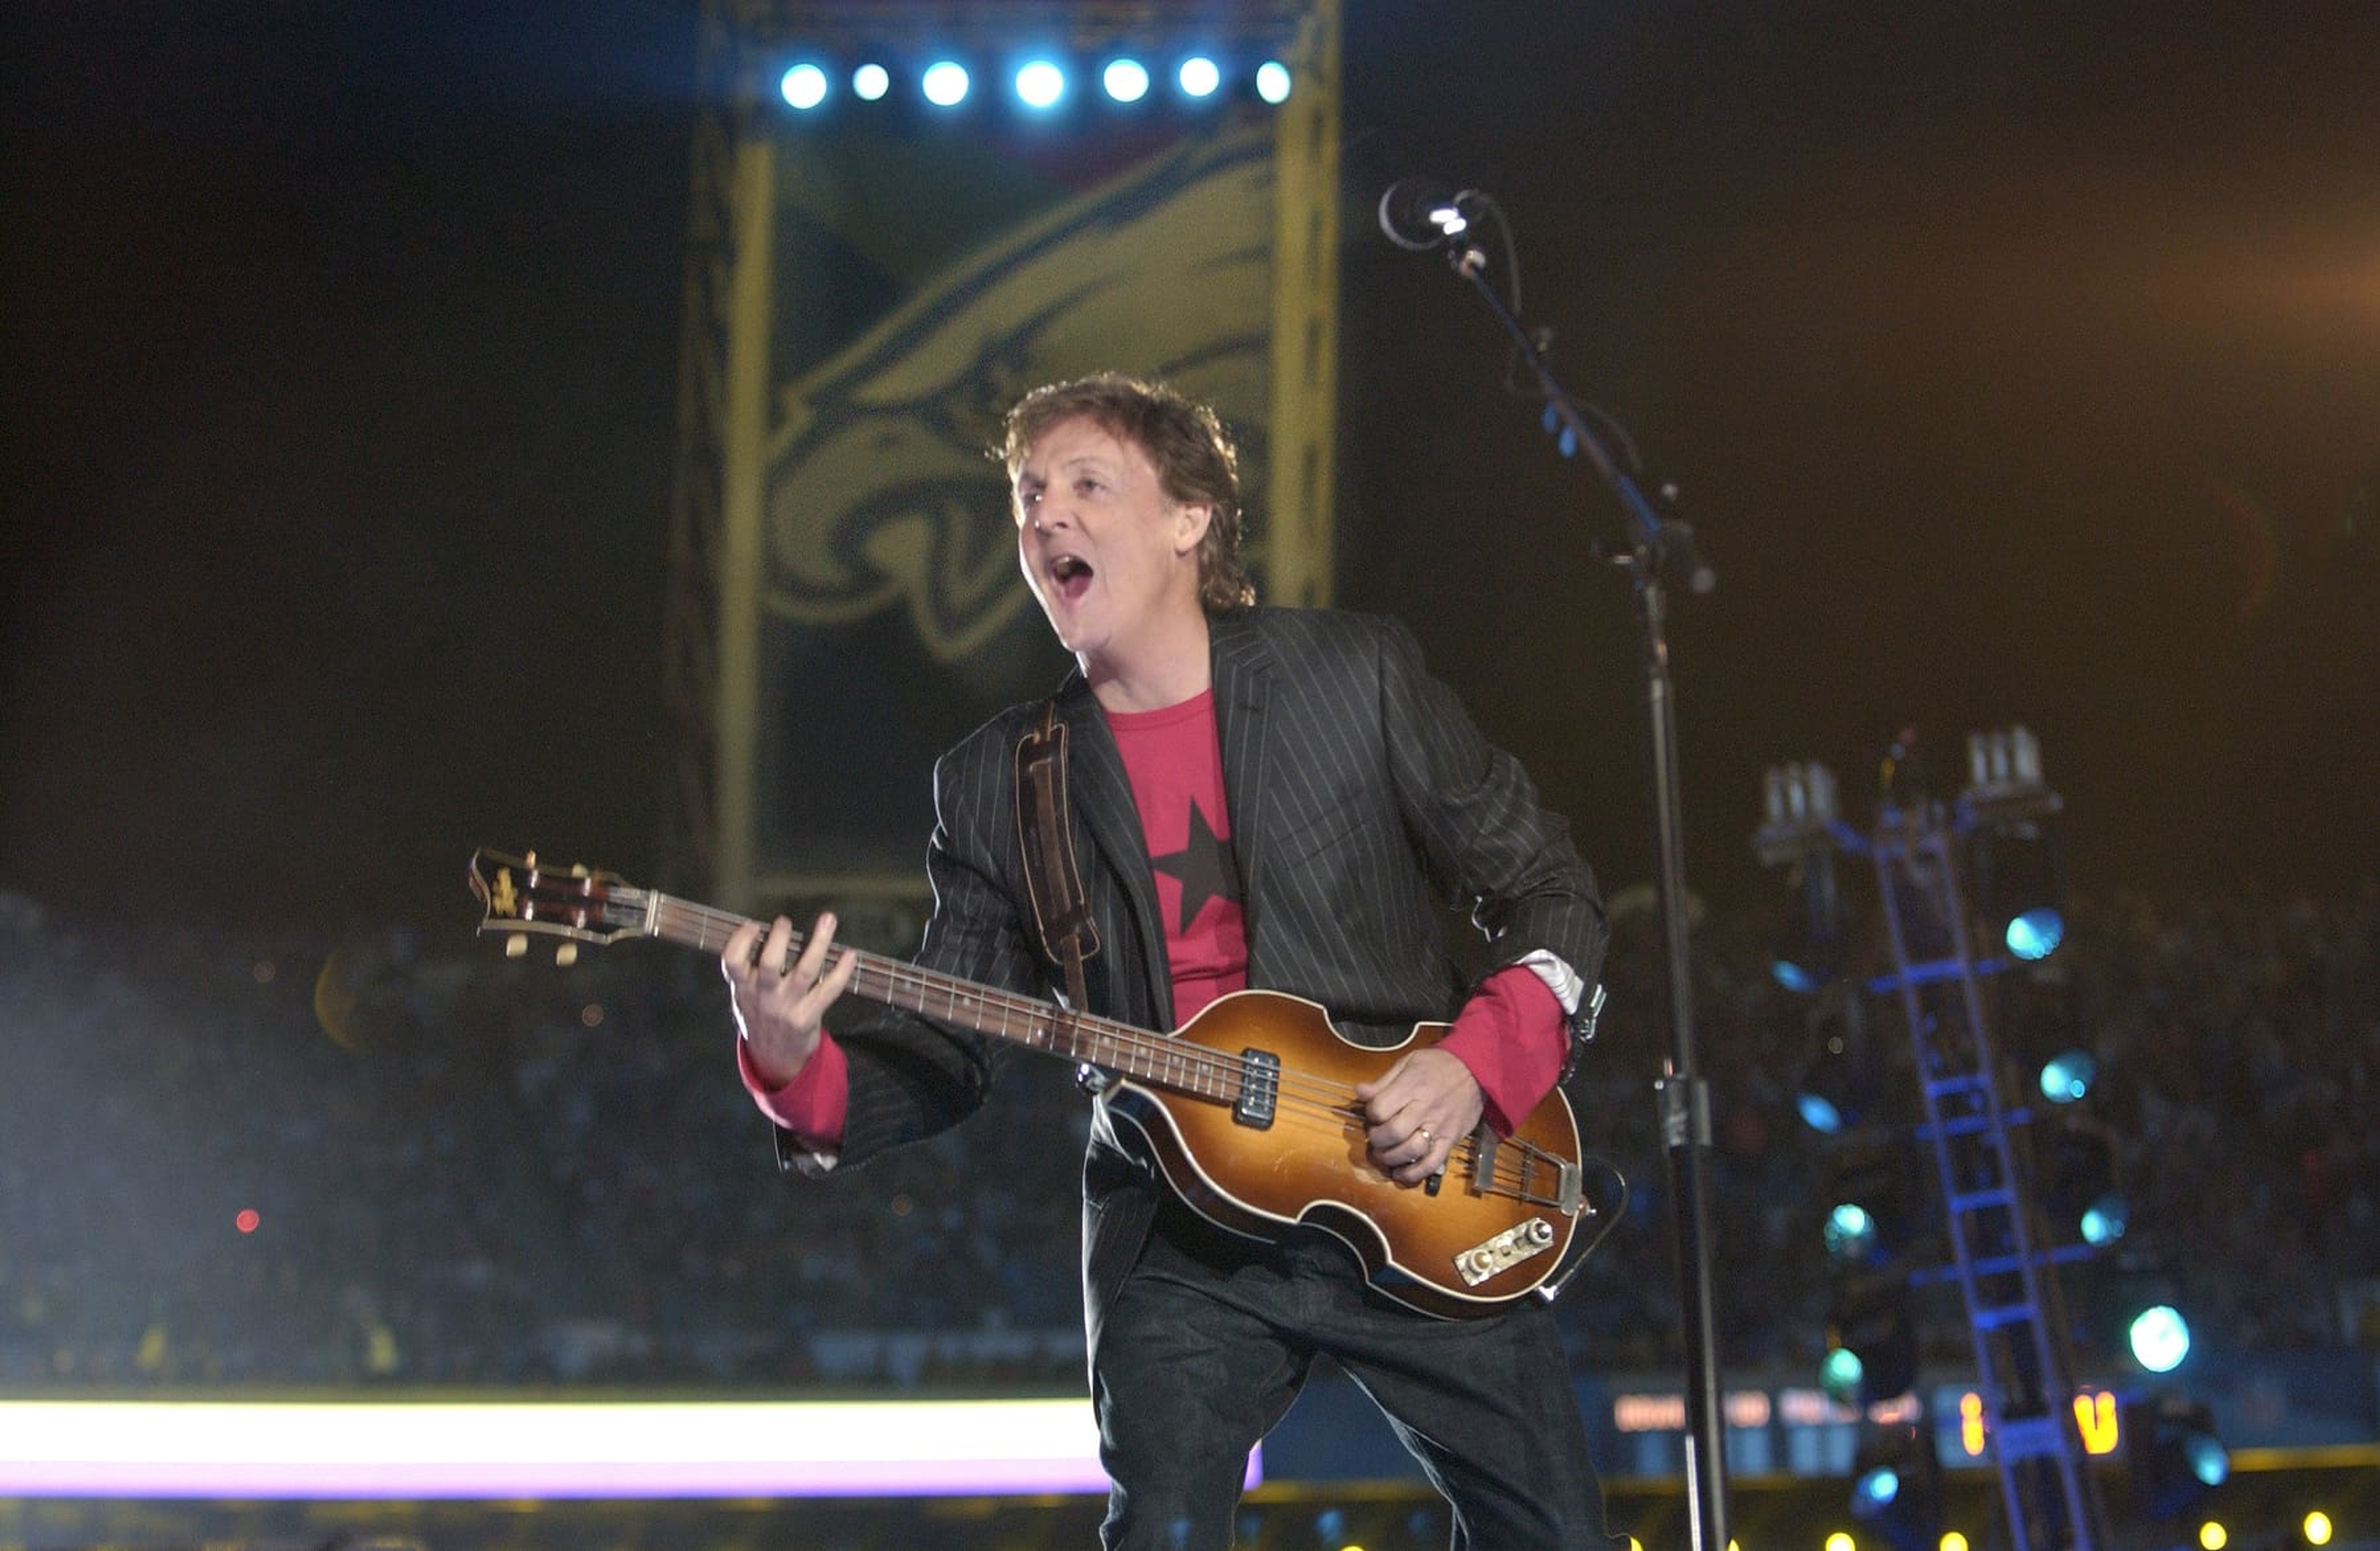 Paul wearing a red t shirt and black blazer, holding a bass guitar